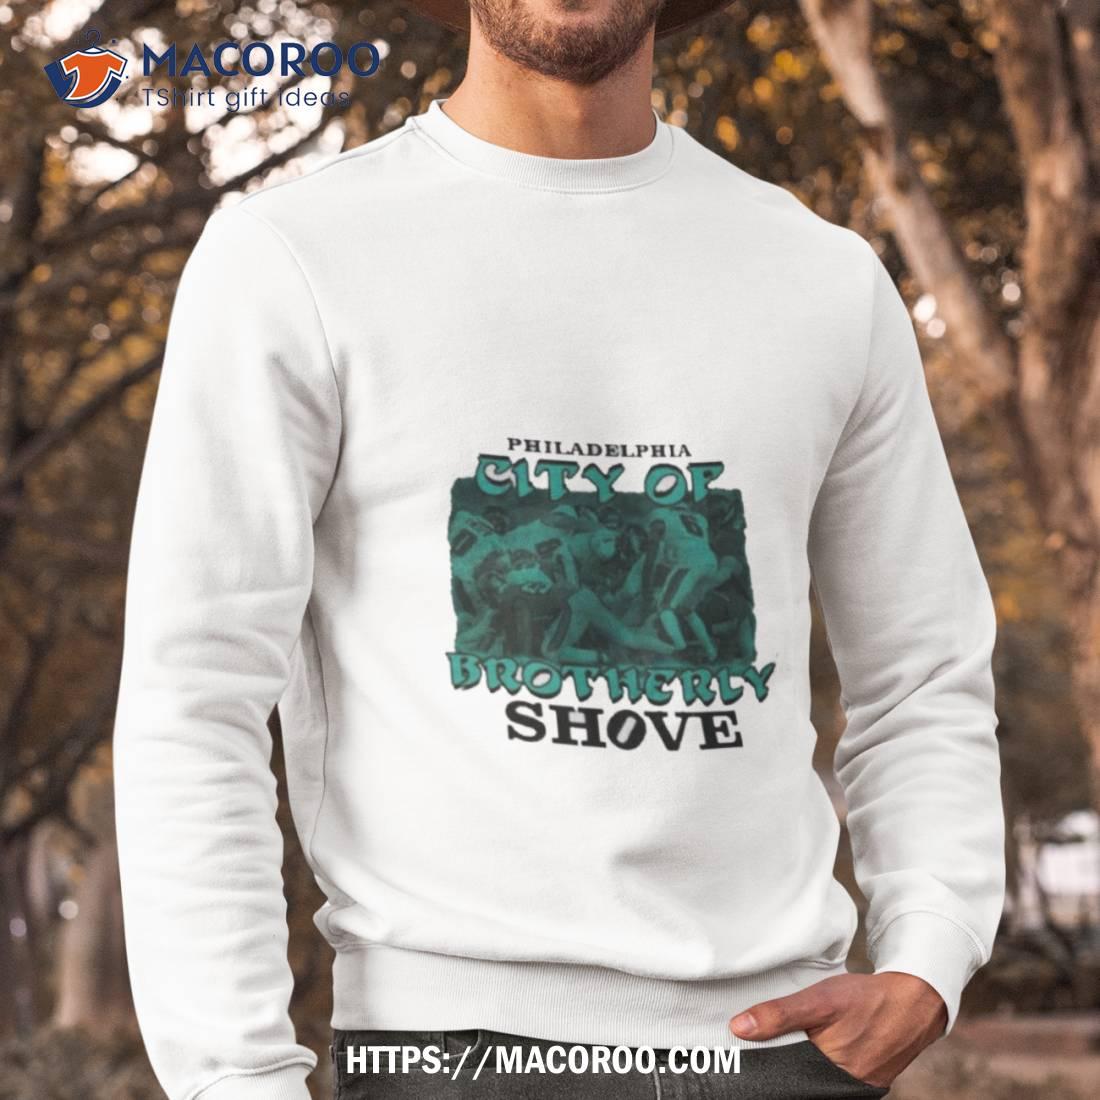 Brotherly Shove Win Its A Philly Thing Philadelphia Eagles Shirt